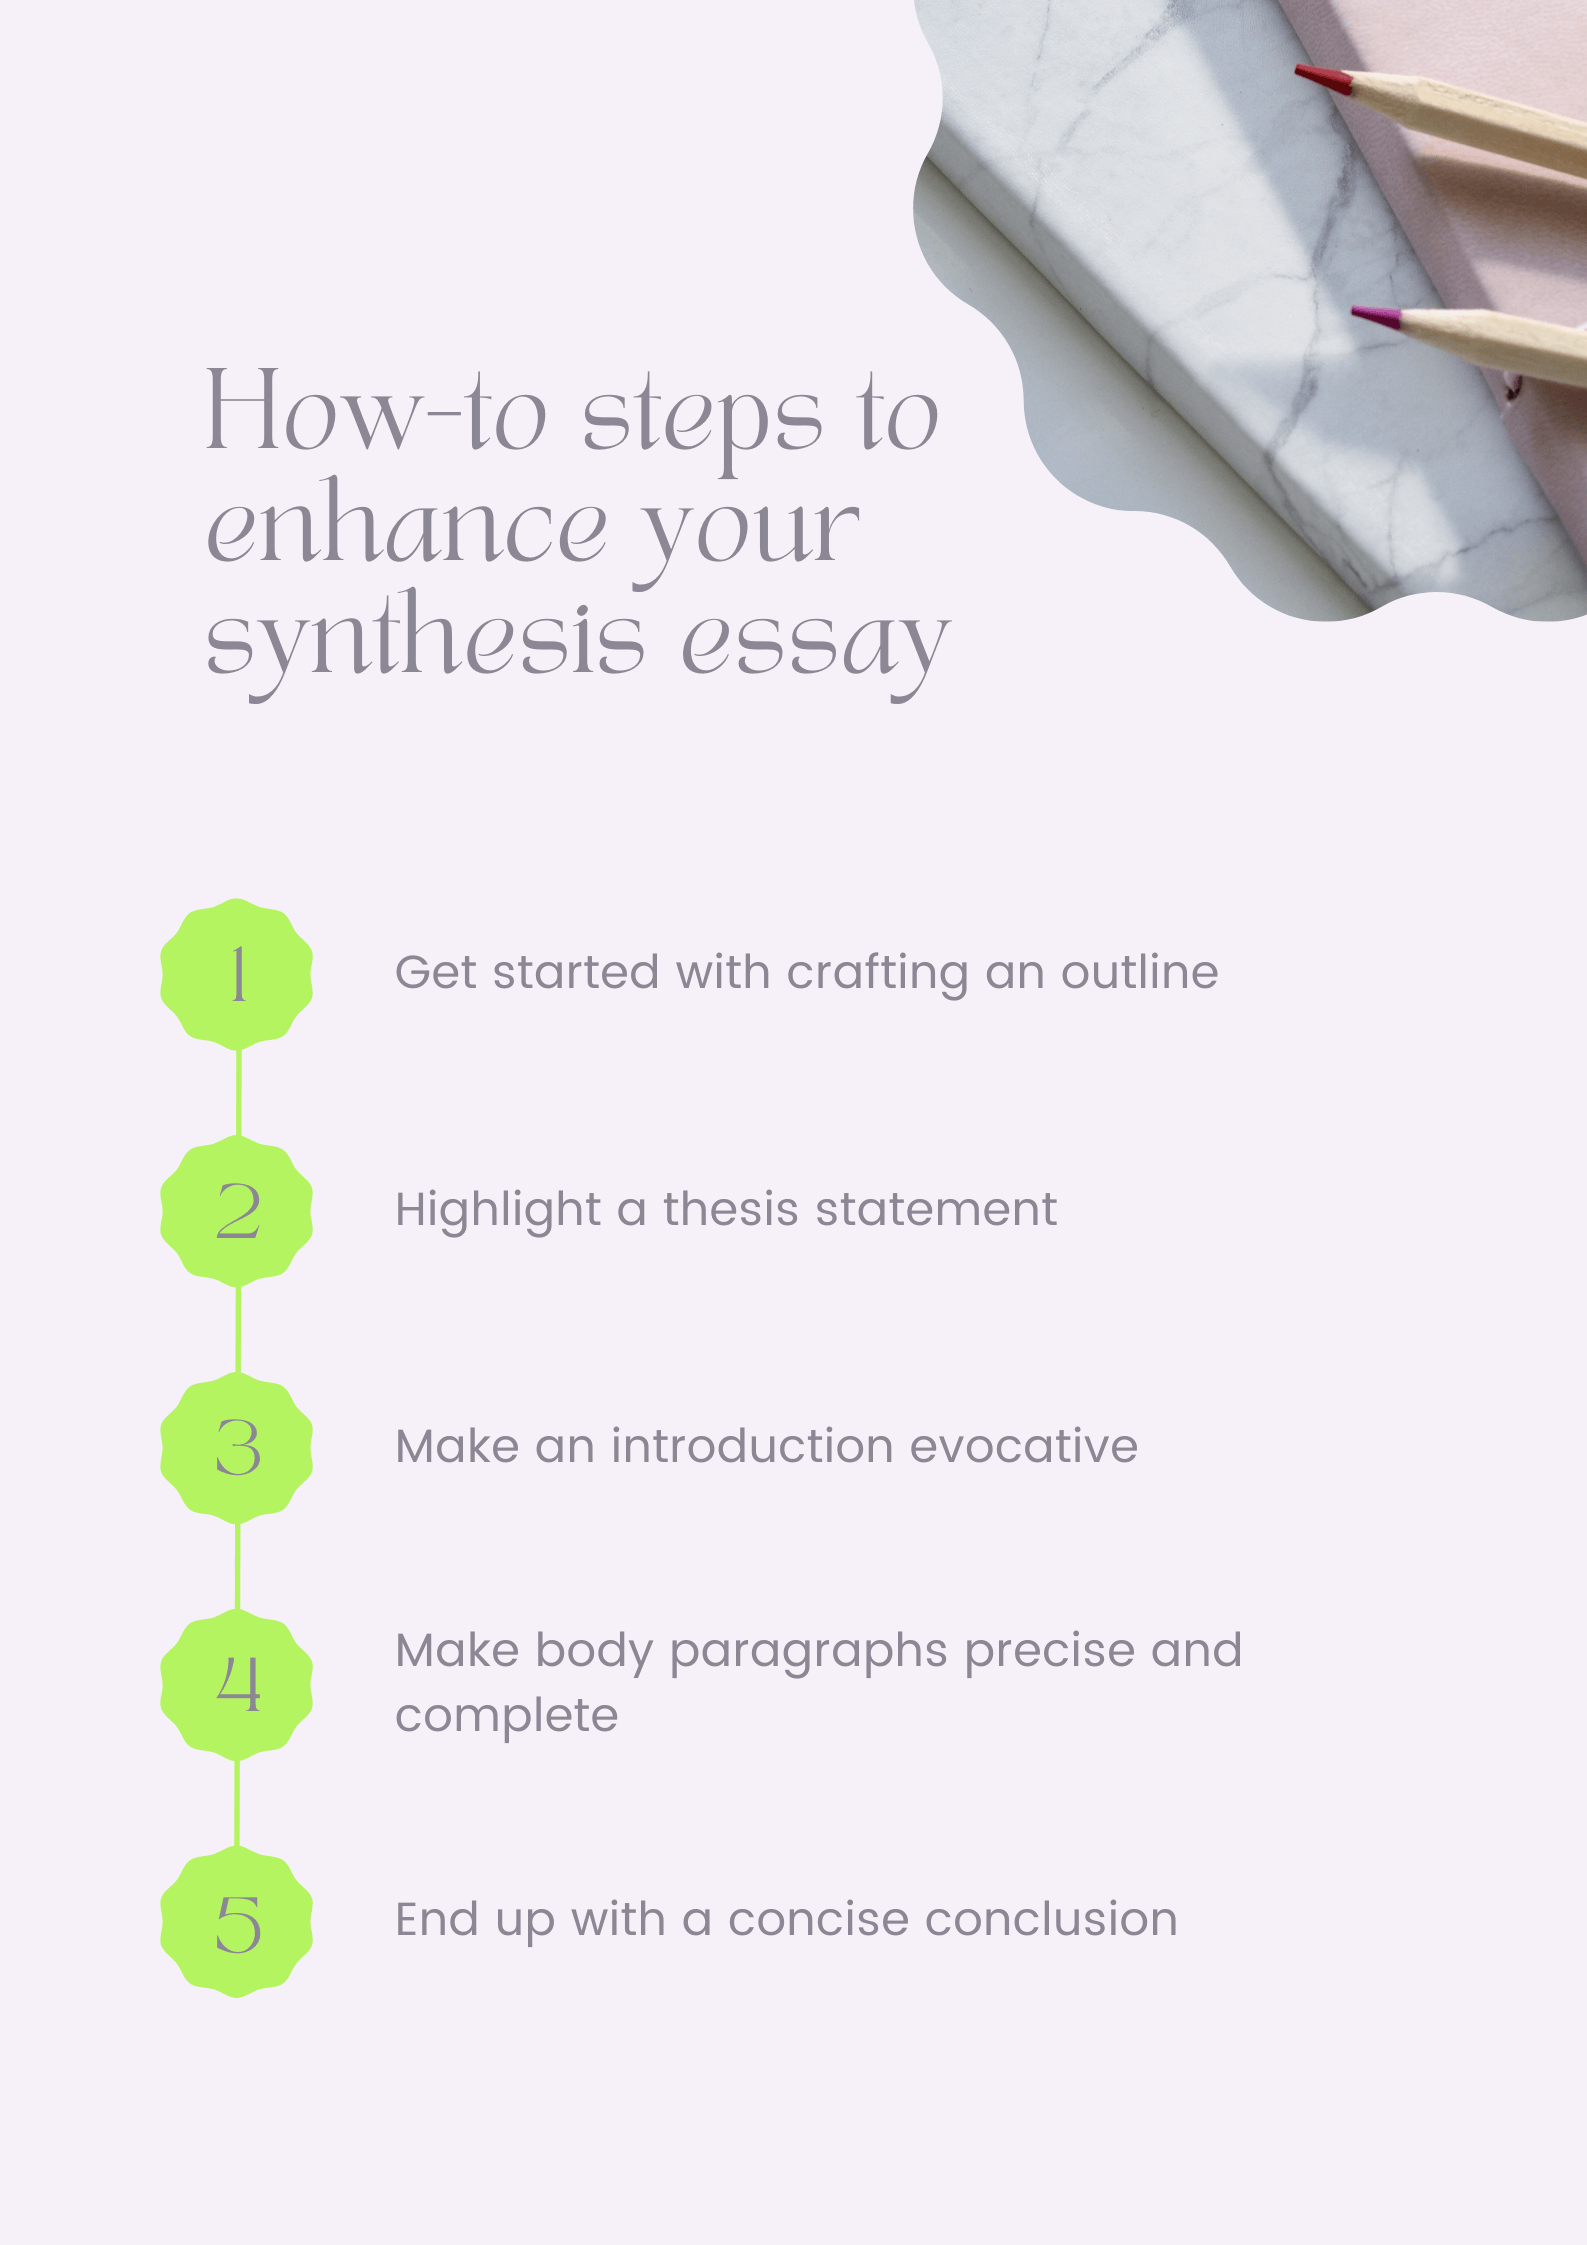 How-to steps to enhance your synthesis essay